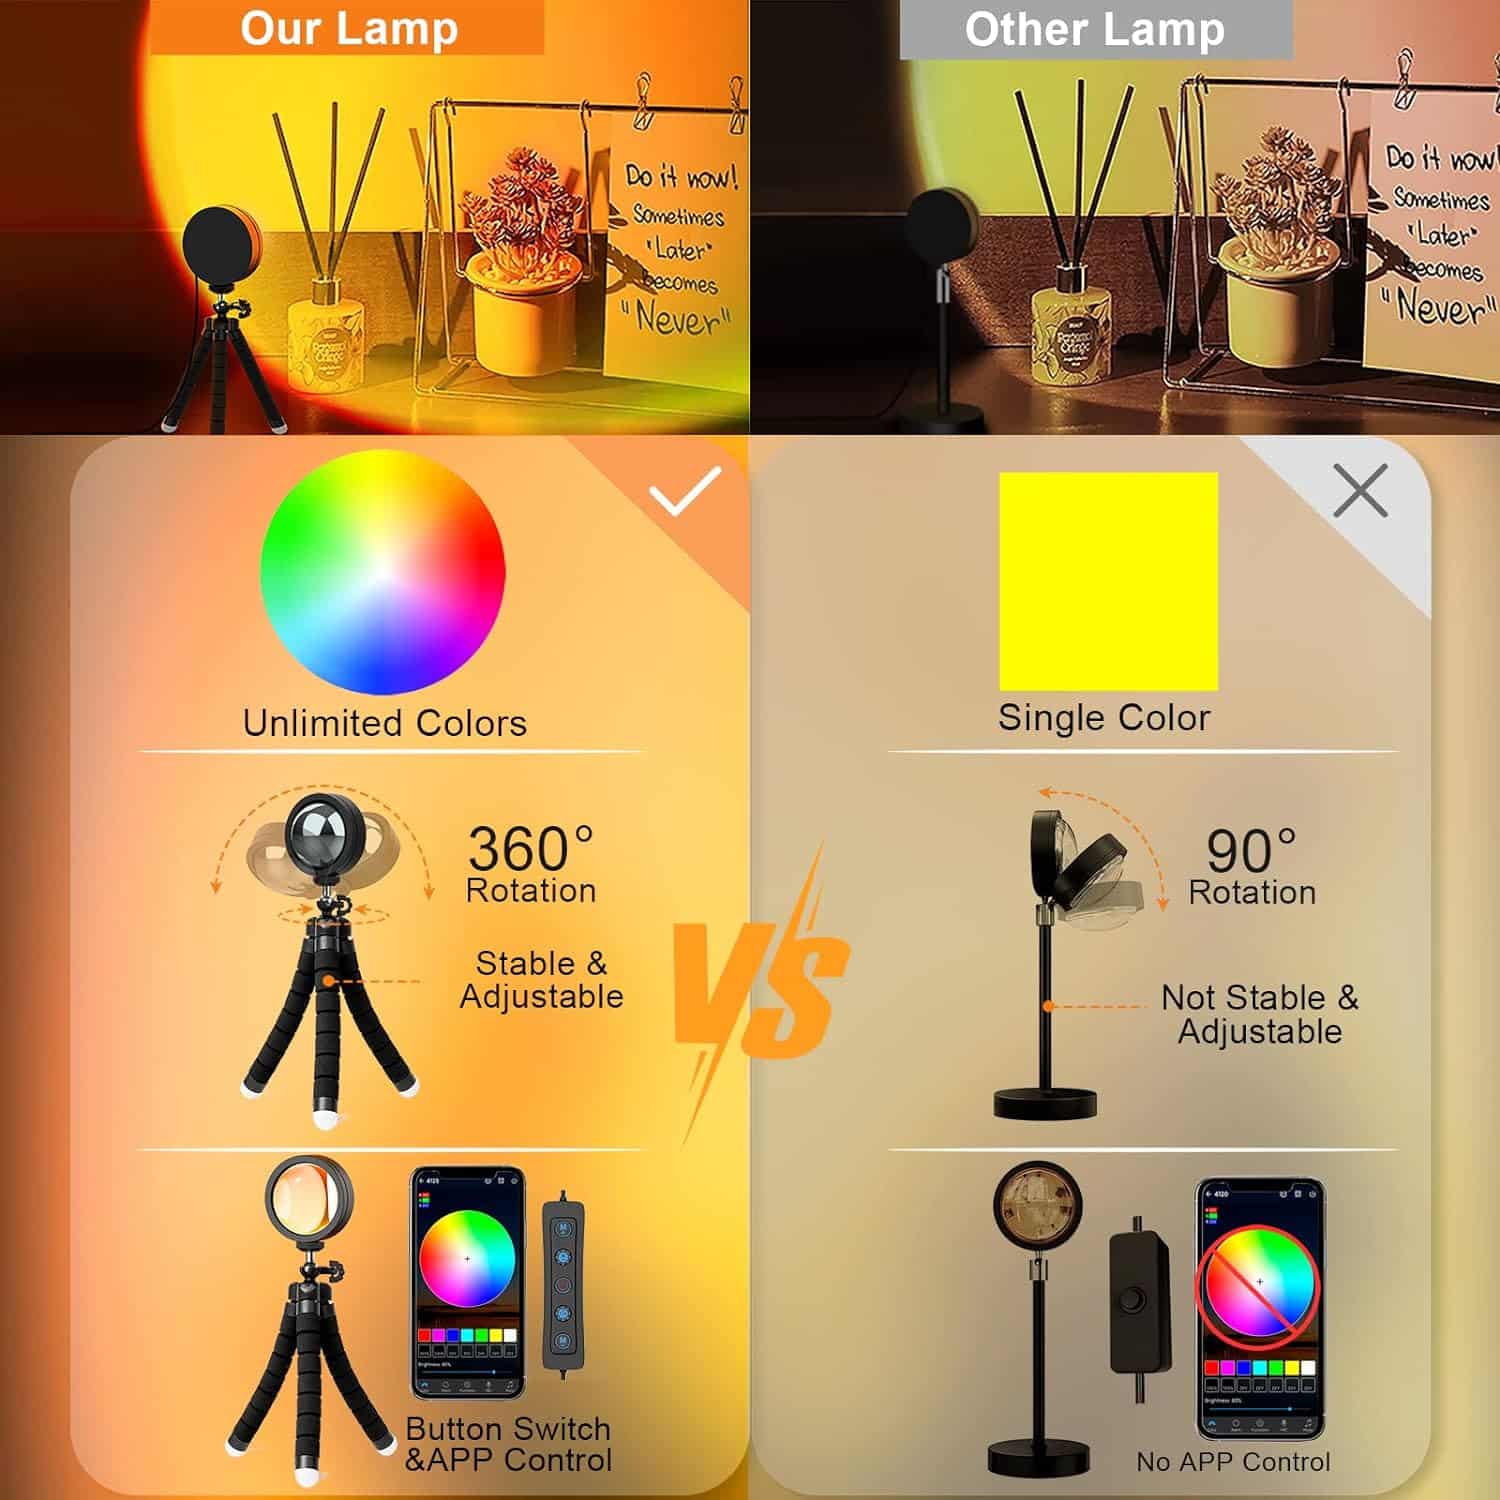 XEBKOR Sunset Lamp Projector Multicolor Changing LED Projection Lamp,Switch Button and APP Control 360 Degree Rotation Sunlight Lamp for Bedroom, Photography, Party, Tiktok Live, Room Decor